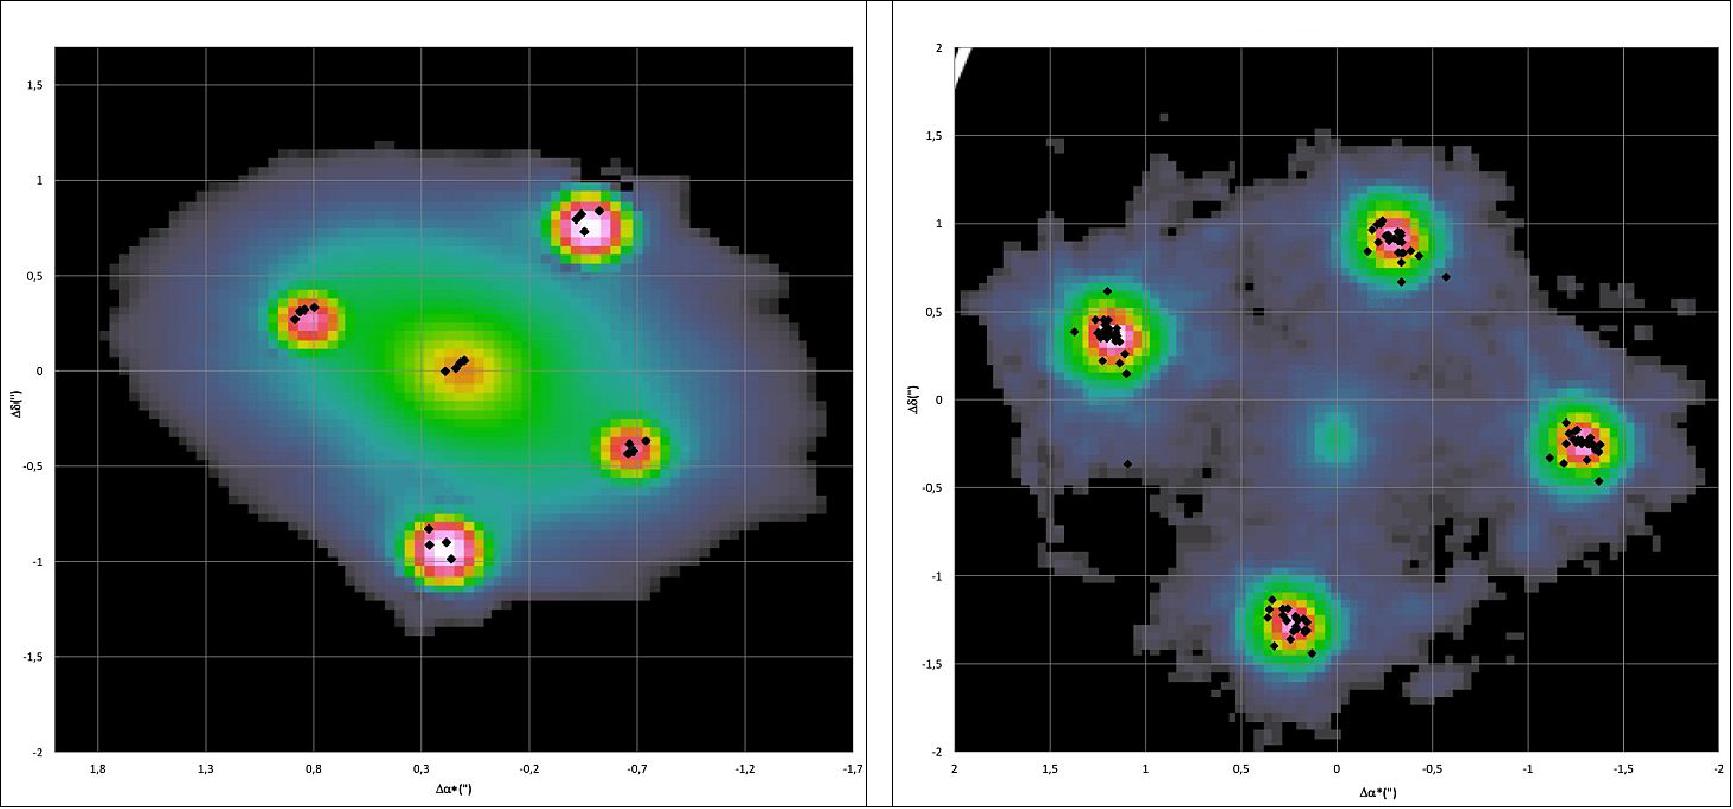 Figure 89: The Einstein Cross (left) and HE0435-1223 (right) with Gaia astrometric positions placed over HST images (image credit: ESA/Gaia/DPAC/Christine Ducourant, Jean-Francois Lecampion (LAB/Observatoire de Bordeaux), Alberto Krone-Martins (SIM/Universidade de Lisboa, LAB/Observatoire de Bordeaux), Laurent Galluccio, Francois Mignard (Observatoire de la Côte d'Azur, Nice)